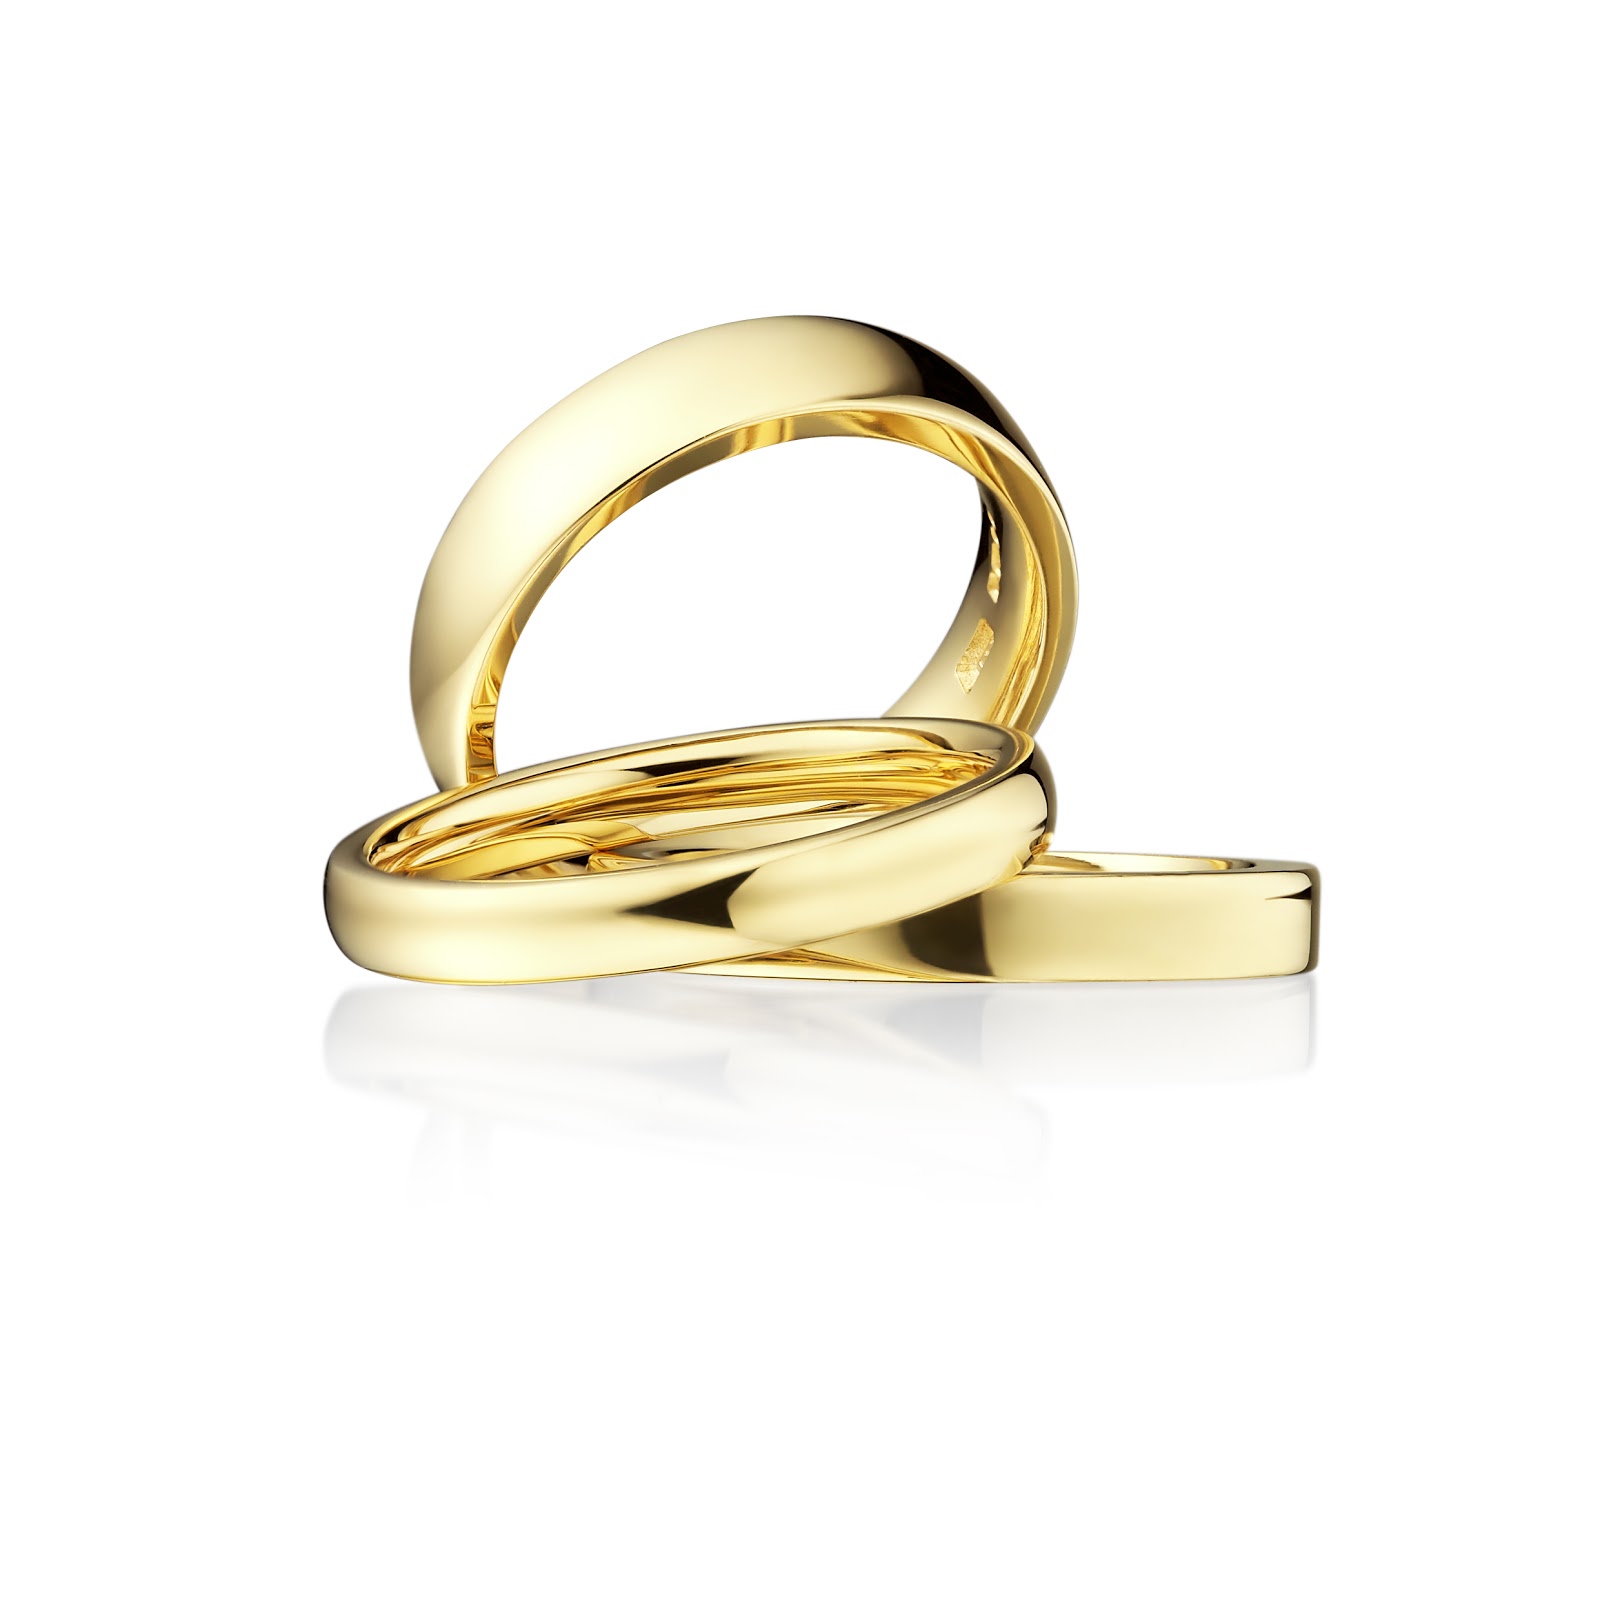 ... gold purchased for custom-made engagement rings or wedding bands